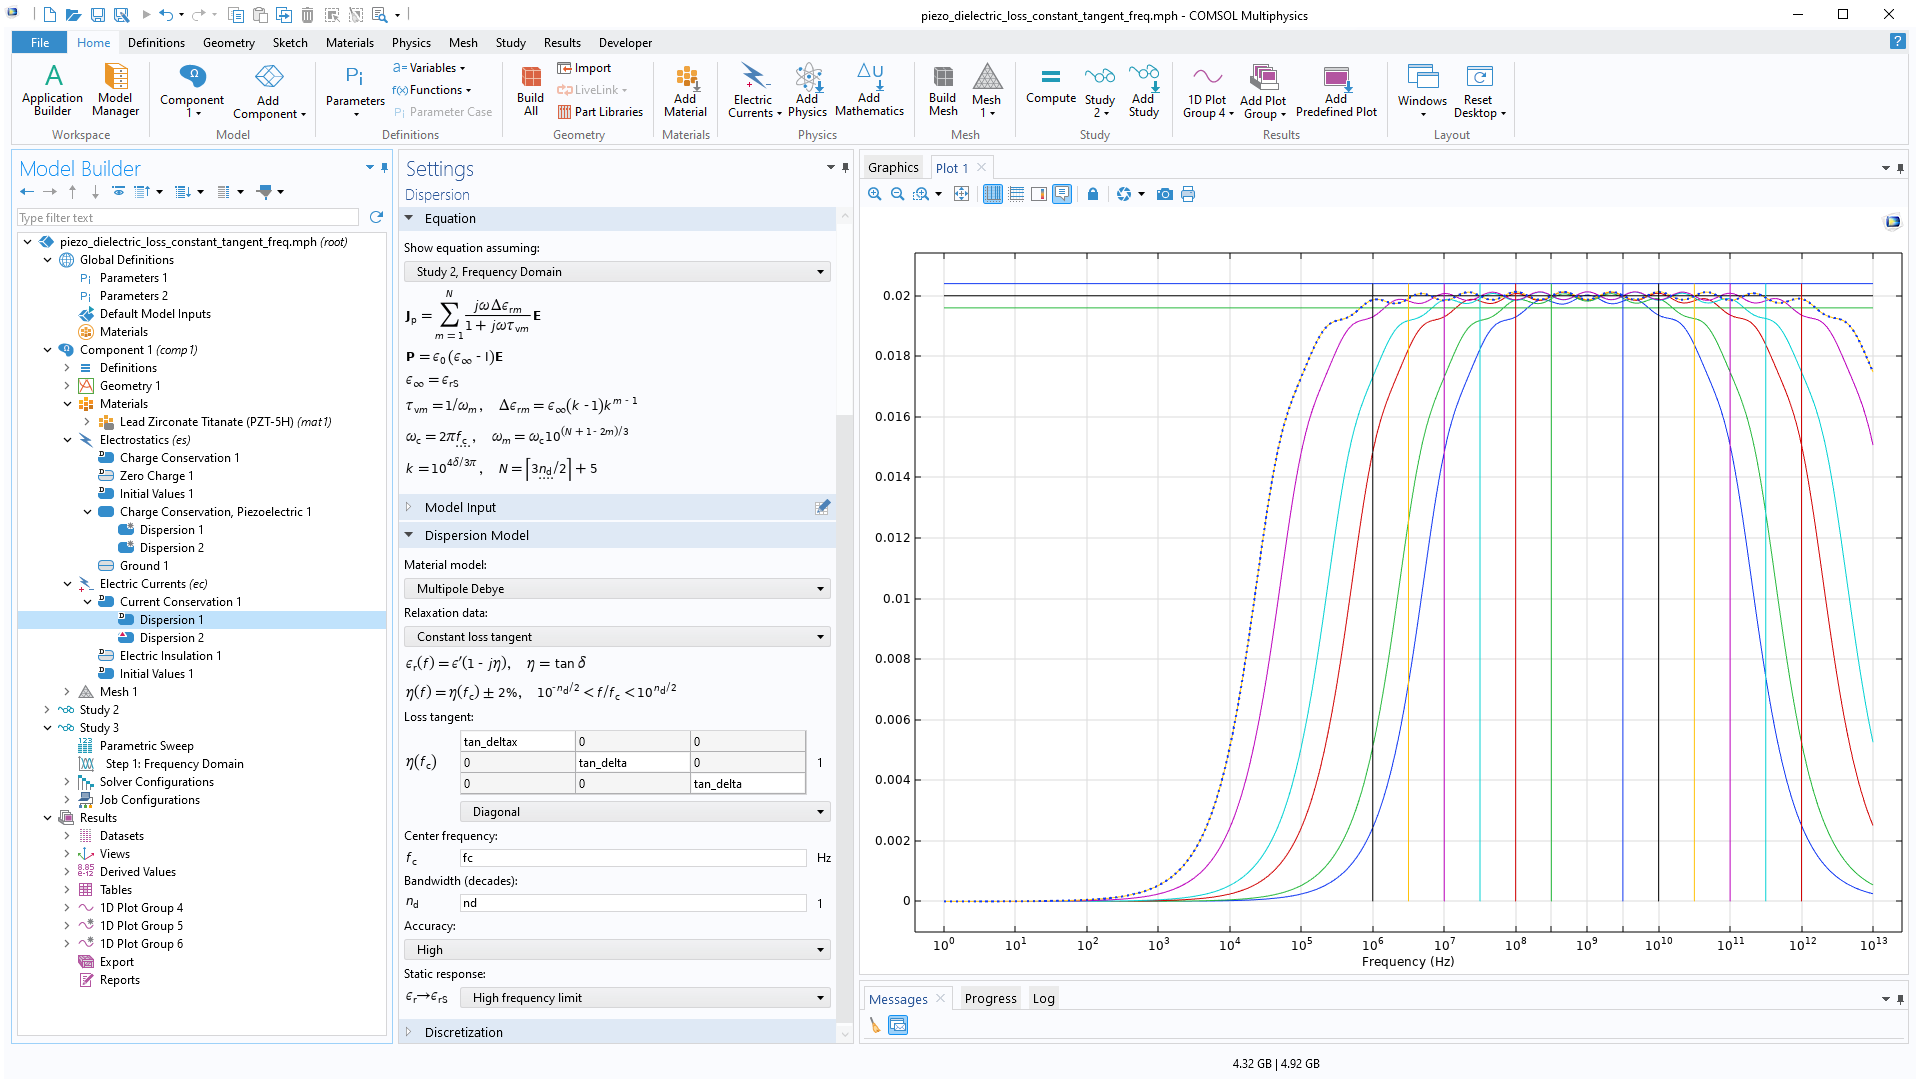 The COMSOL Multiphysics UI showing the Model Builder with the Dispersion node highlighted, the corresponding Settings window, and a 1D plot in the Graphics window.